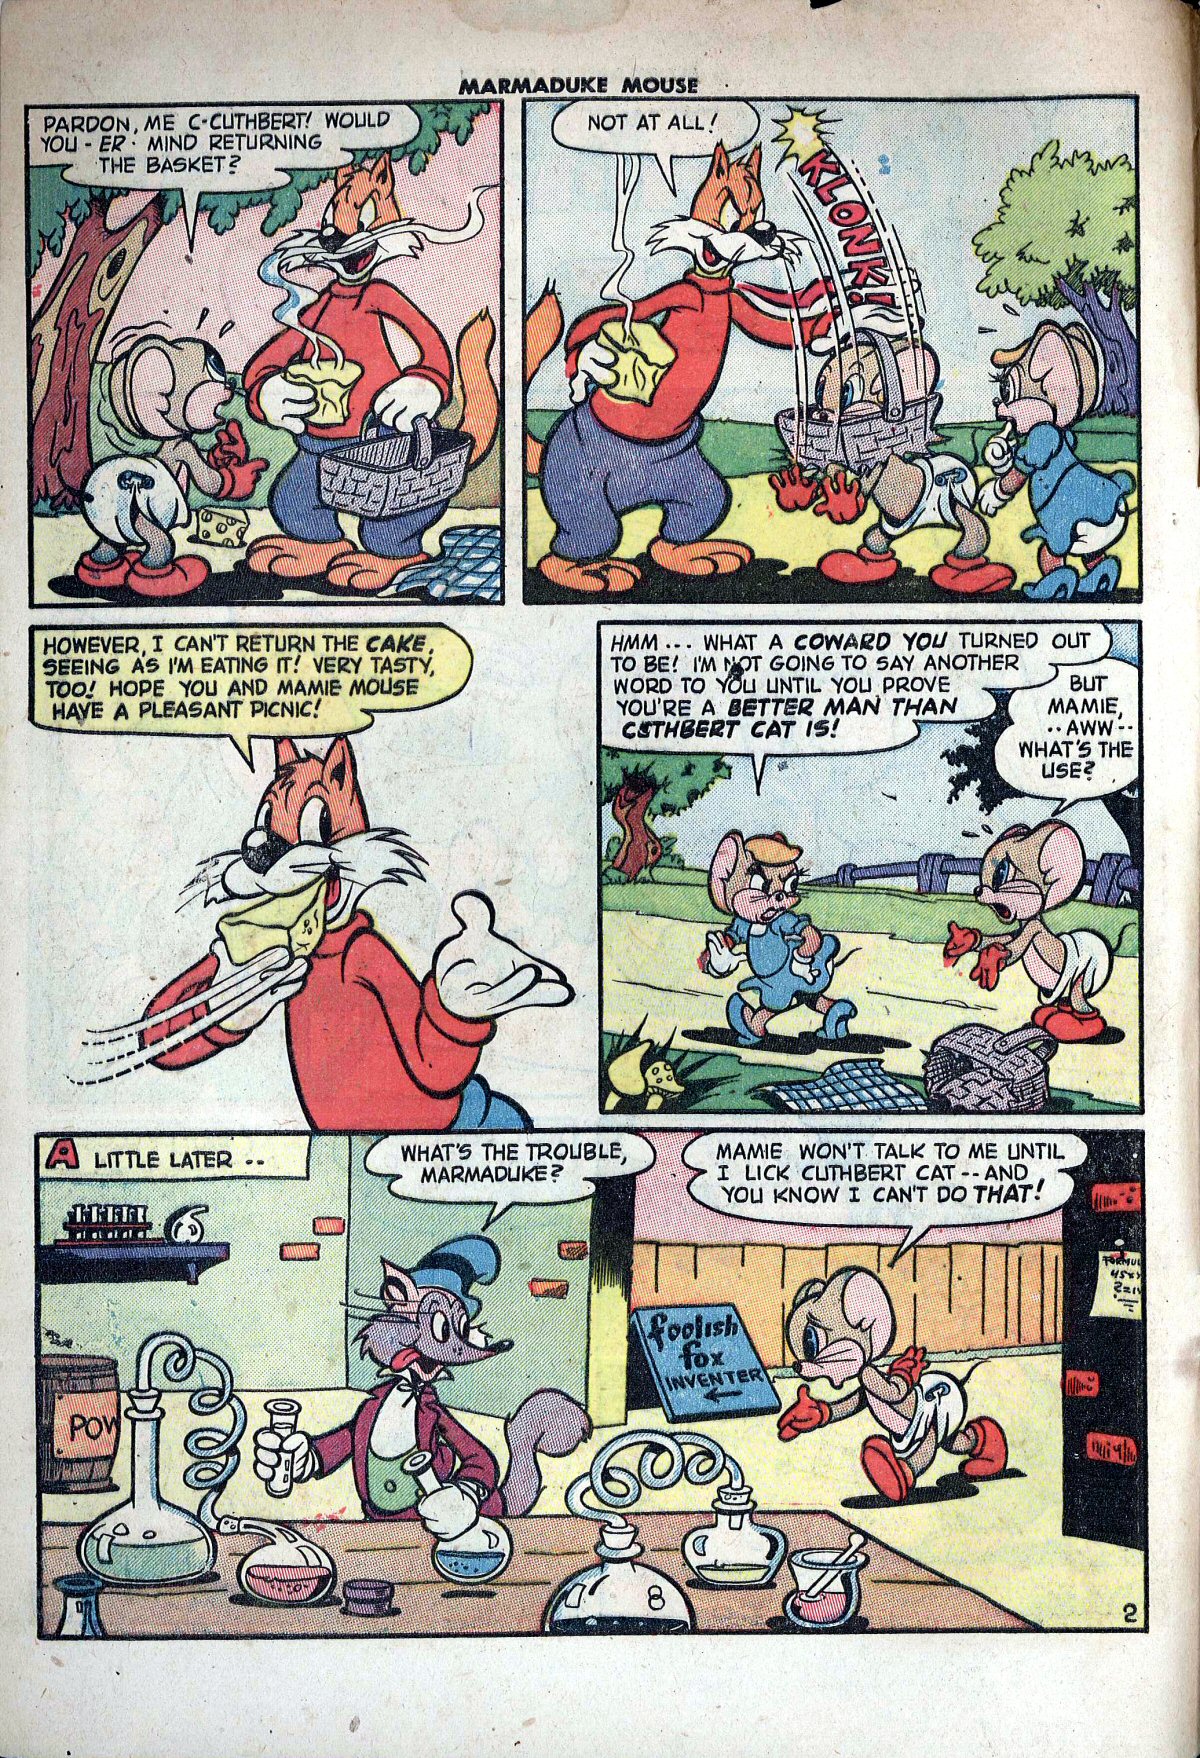 Read online Marmaduke Mouse comic -  Issue #39 - 4